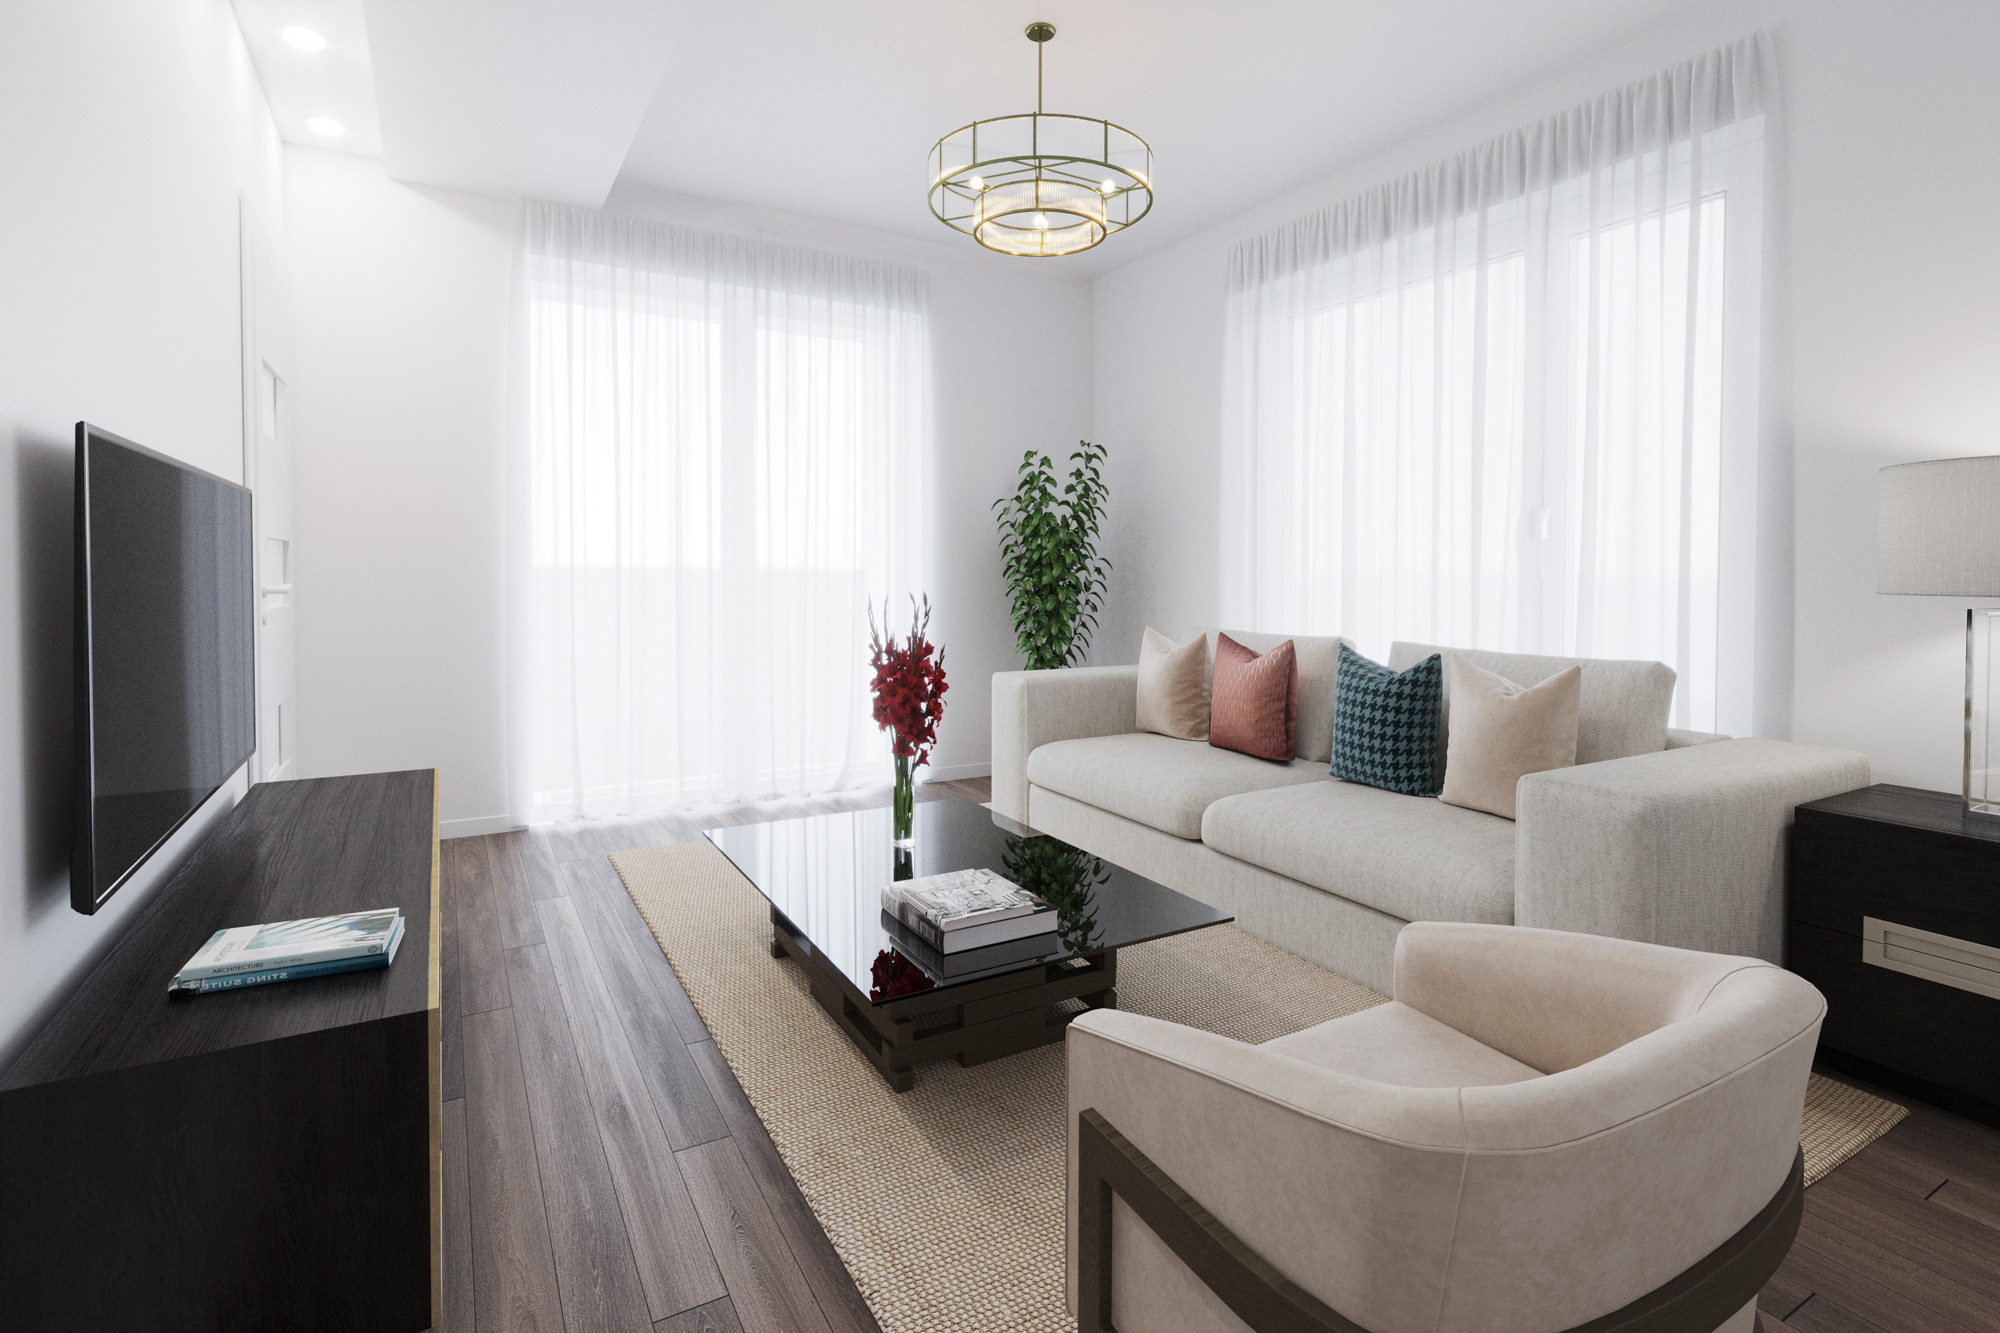 Luxurious condo unit transformed with white walls